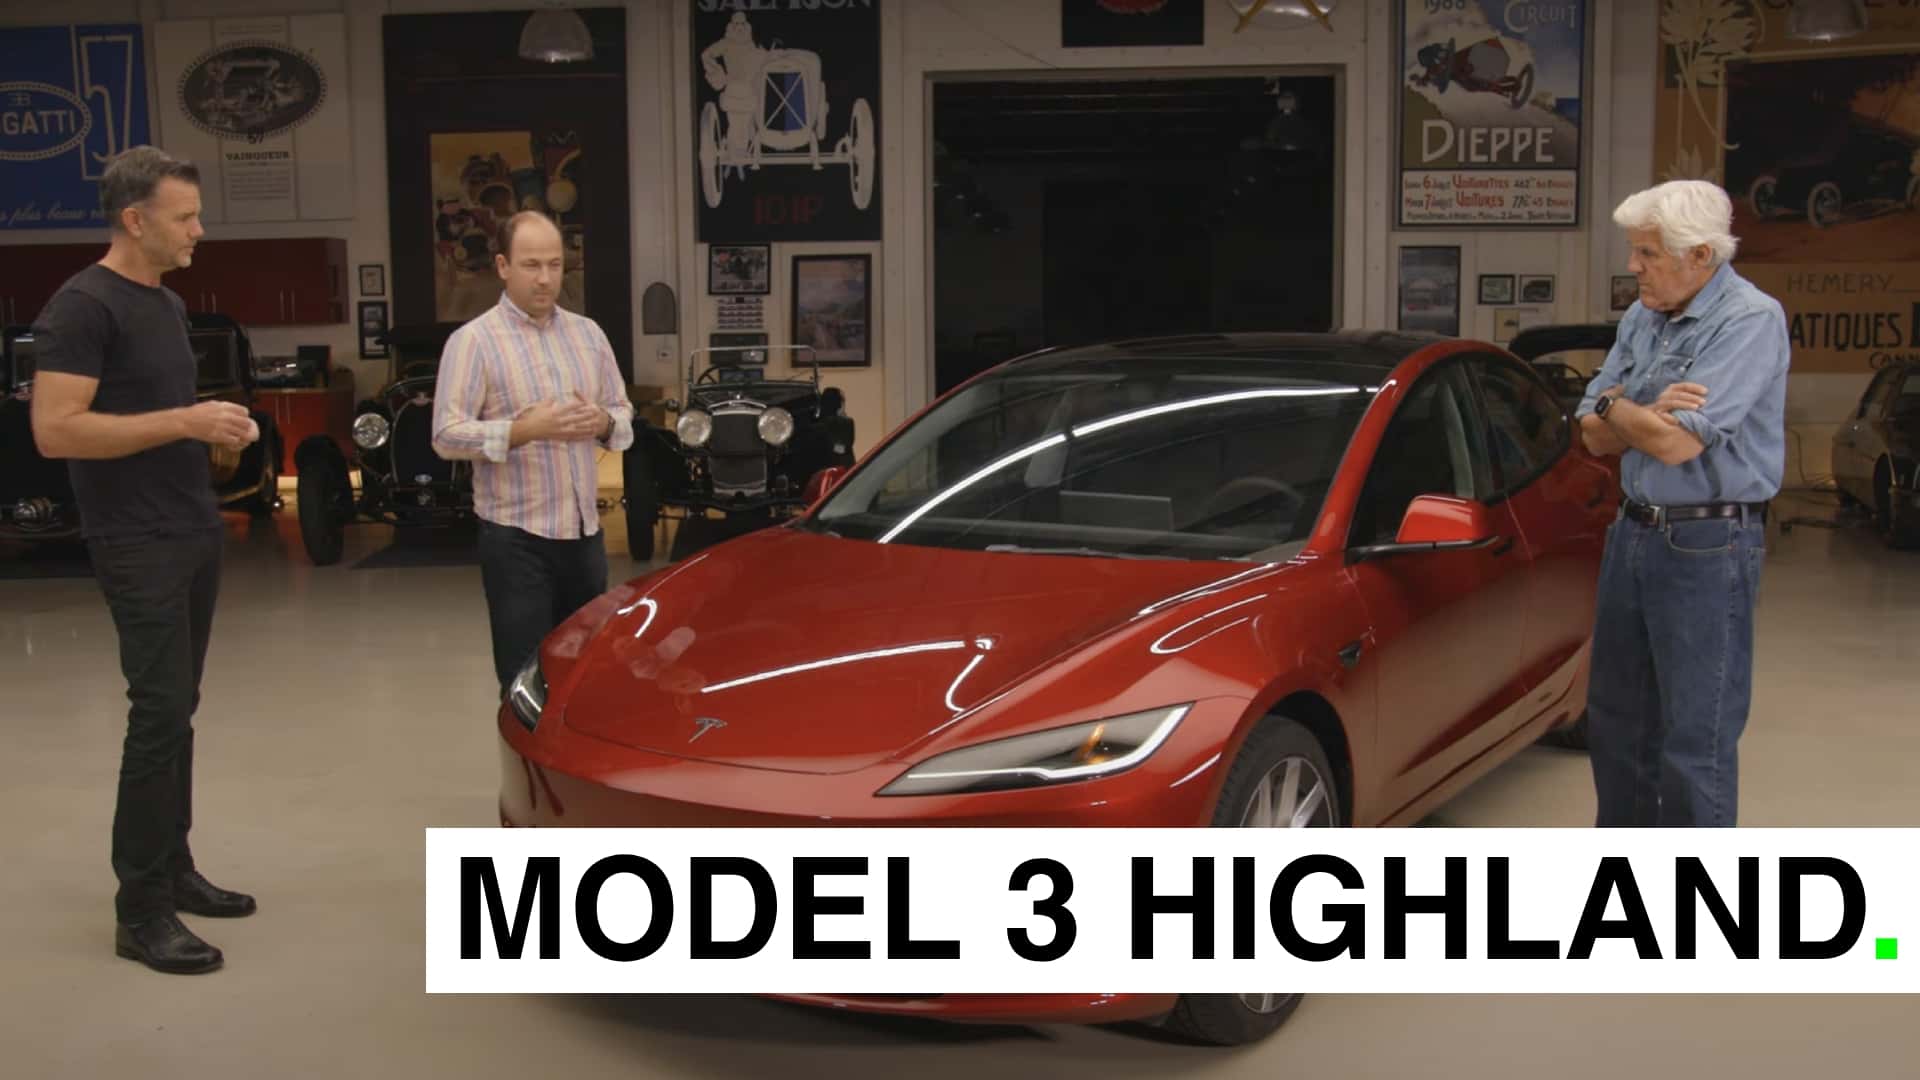 jay leno thinks the new model 3 is a great deal for under $40,000